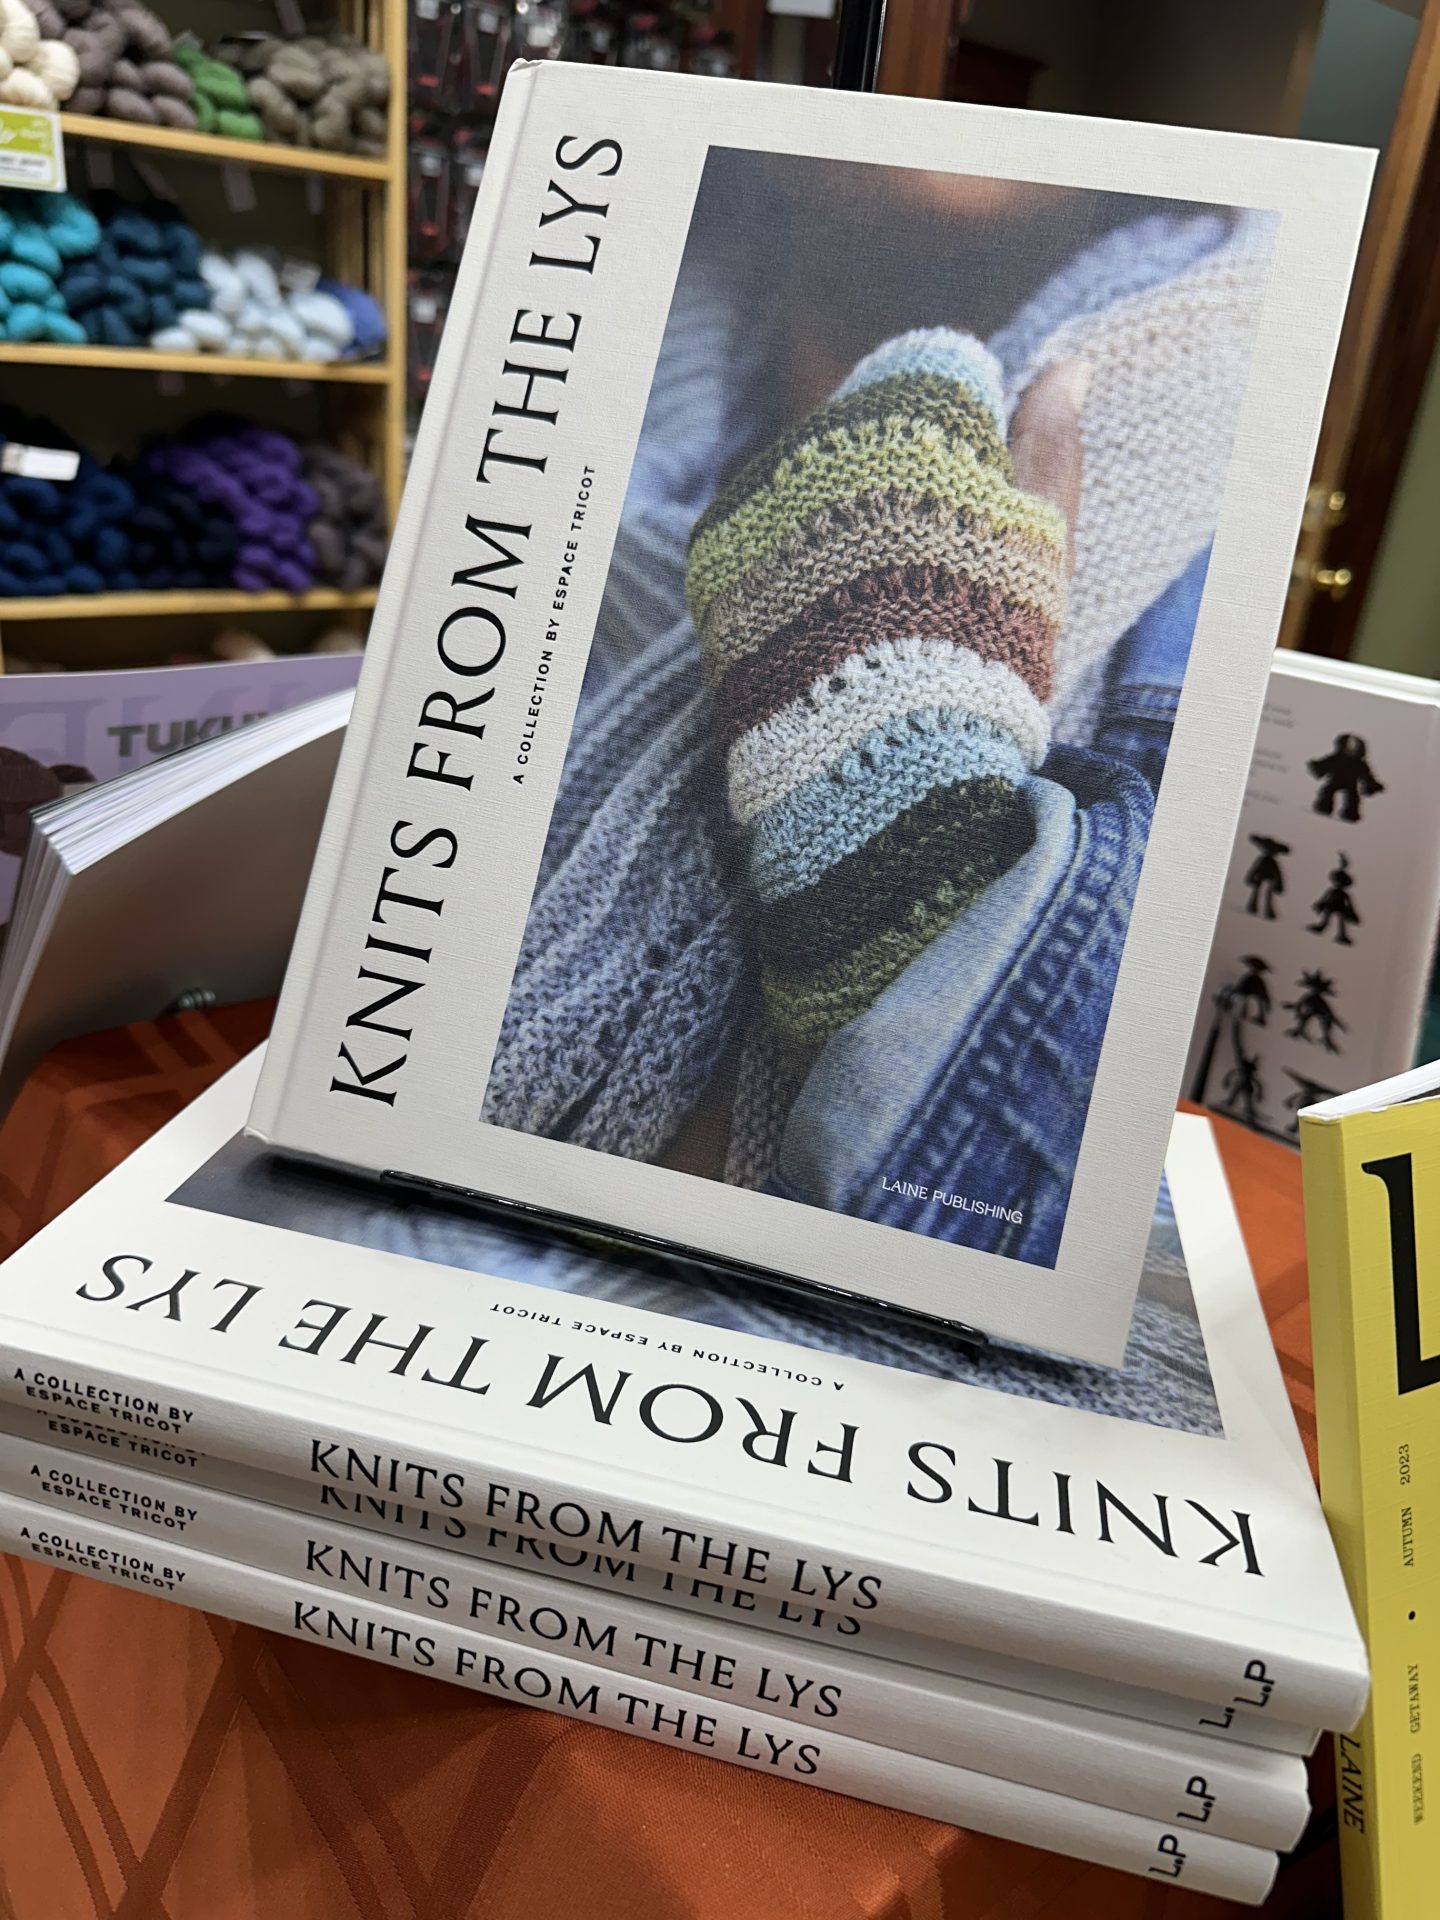 A stack of books with the title Knits from the LYS are displayed in the foreground with shelves full of yarn in the background.